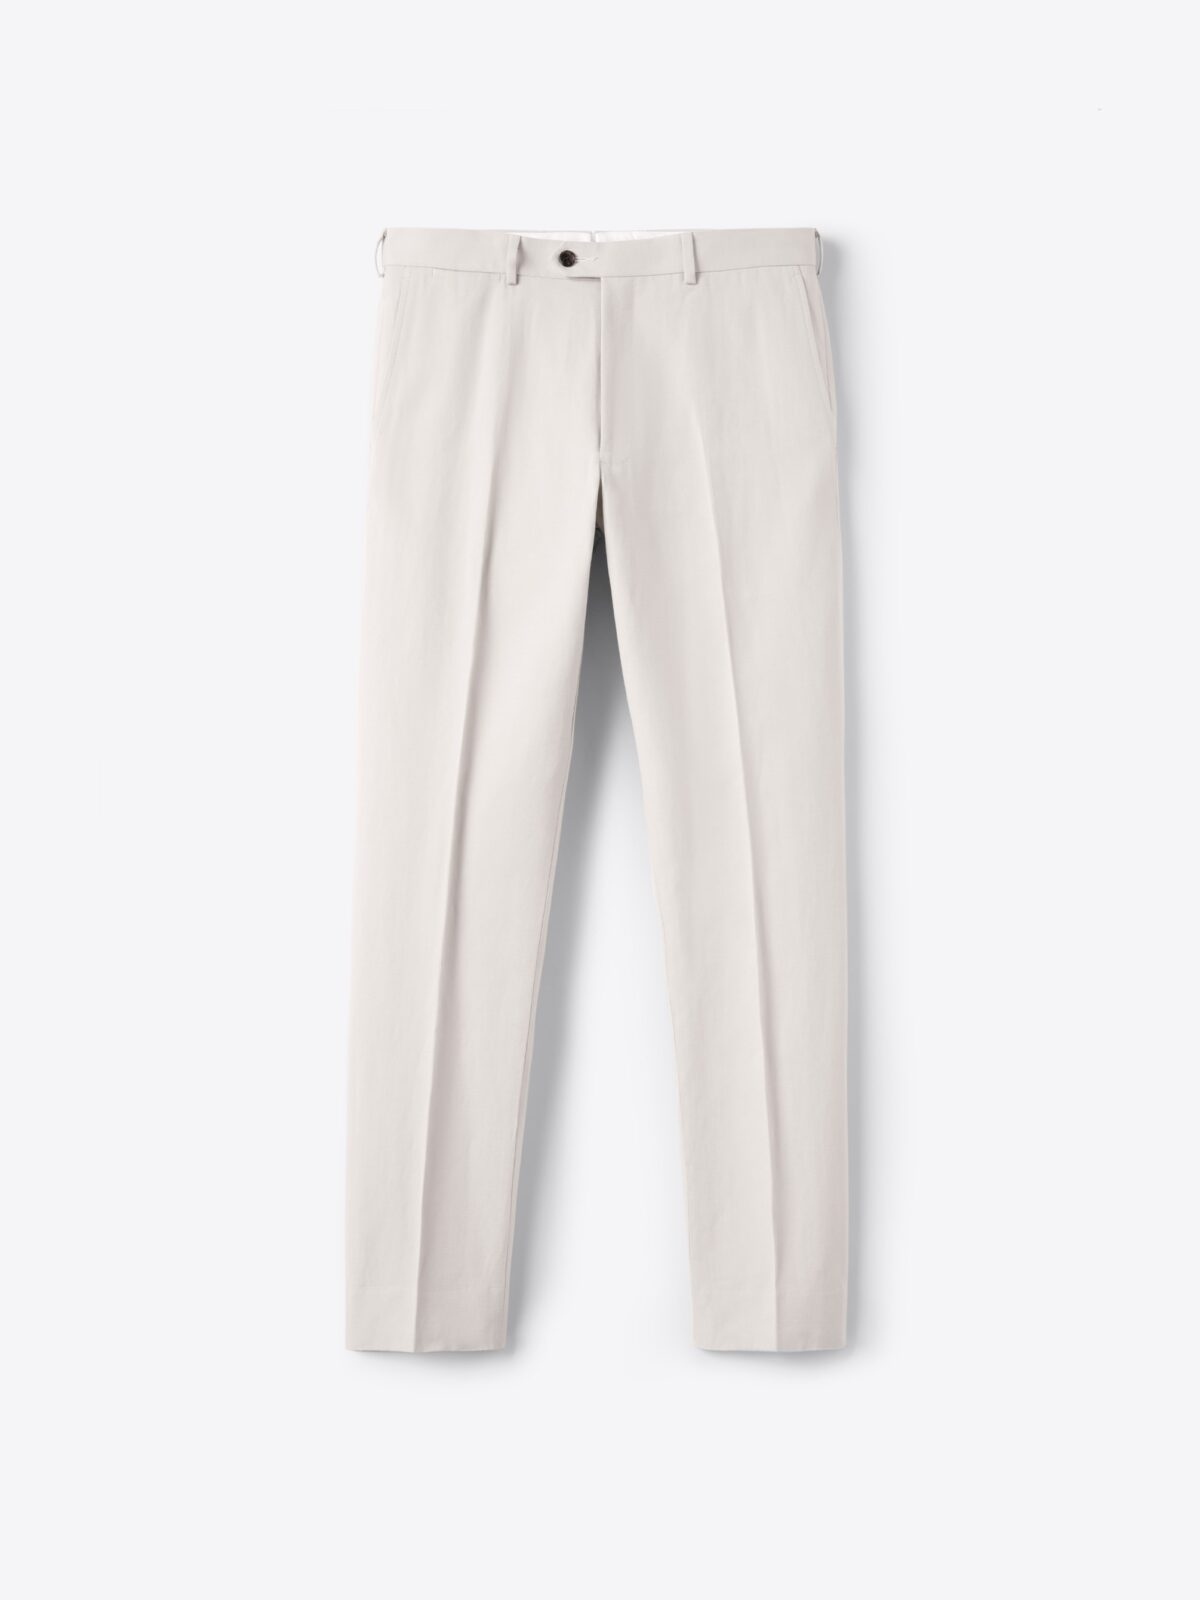 Relaxed Ankle Trouser Pants In Stretch Twill - Cashmere Tan